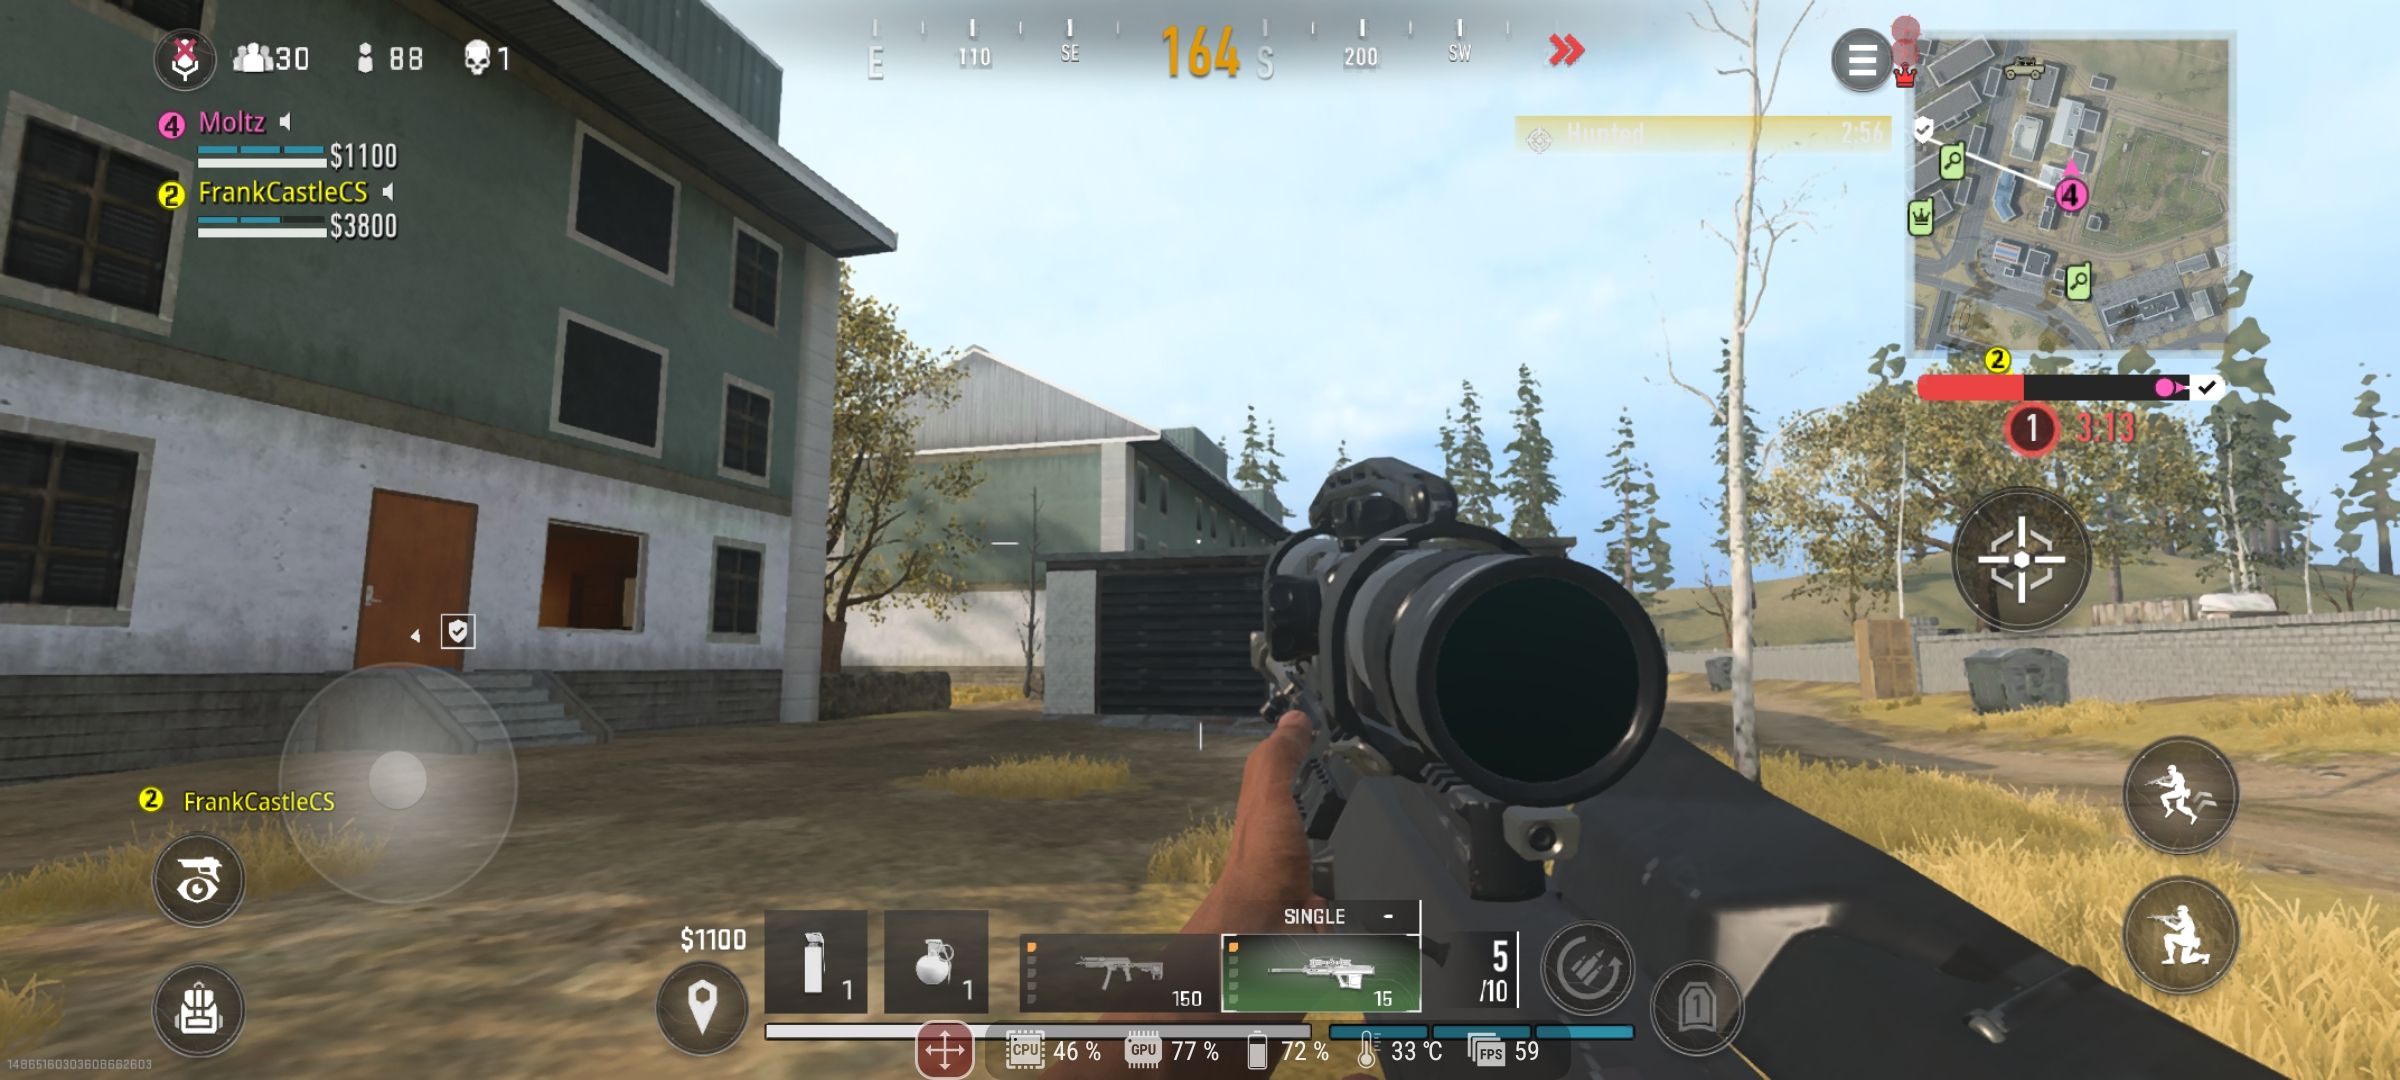 Call of Duty Warzone Mobile screenshot showing gameplay holding sniper rifle